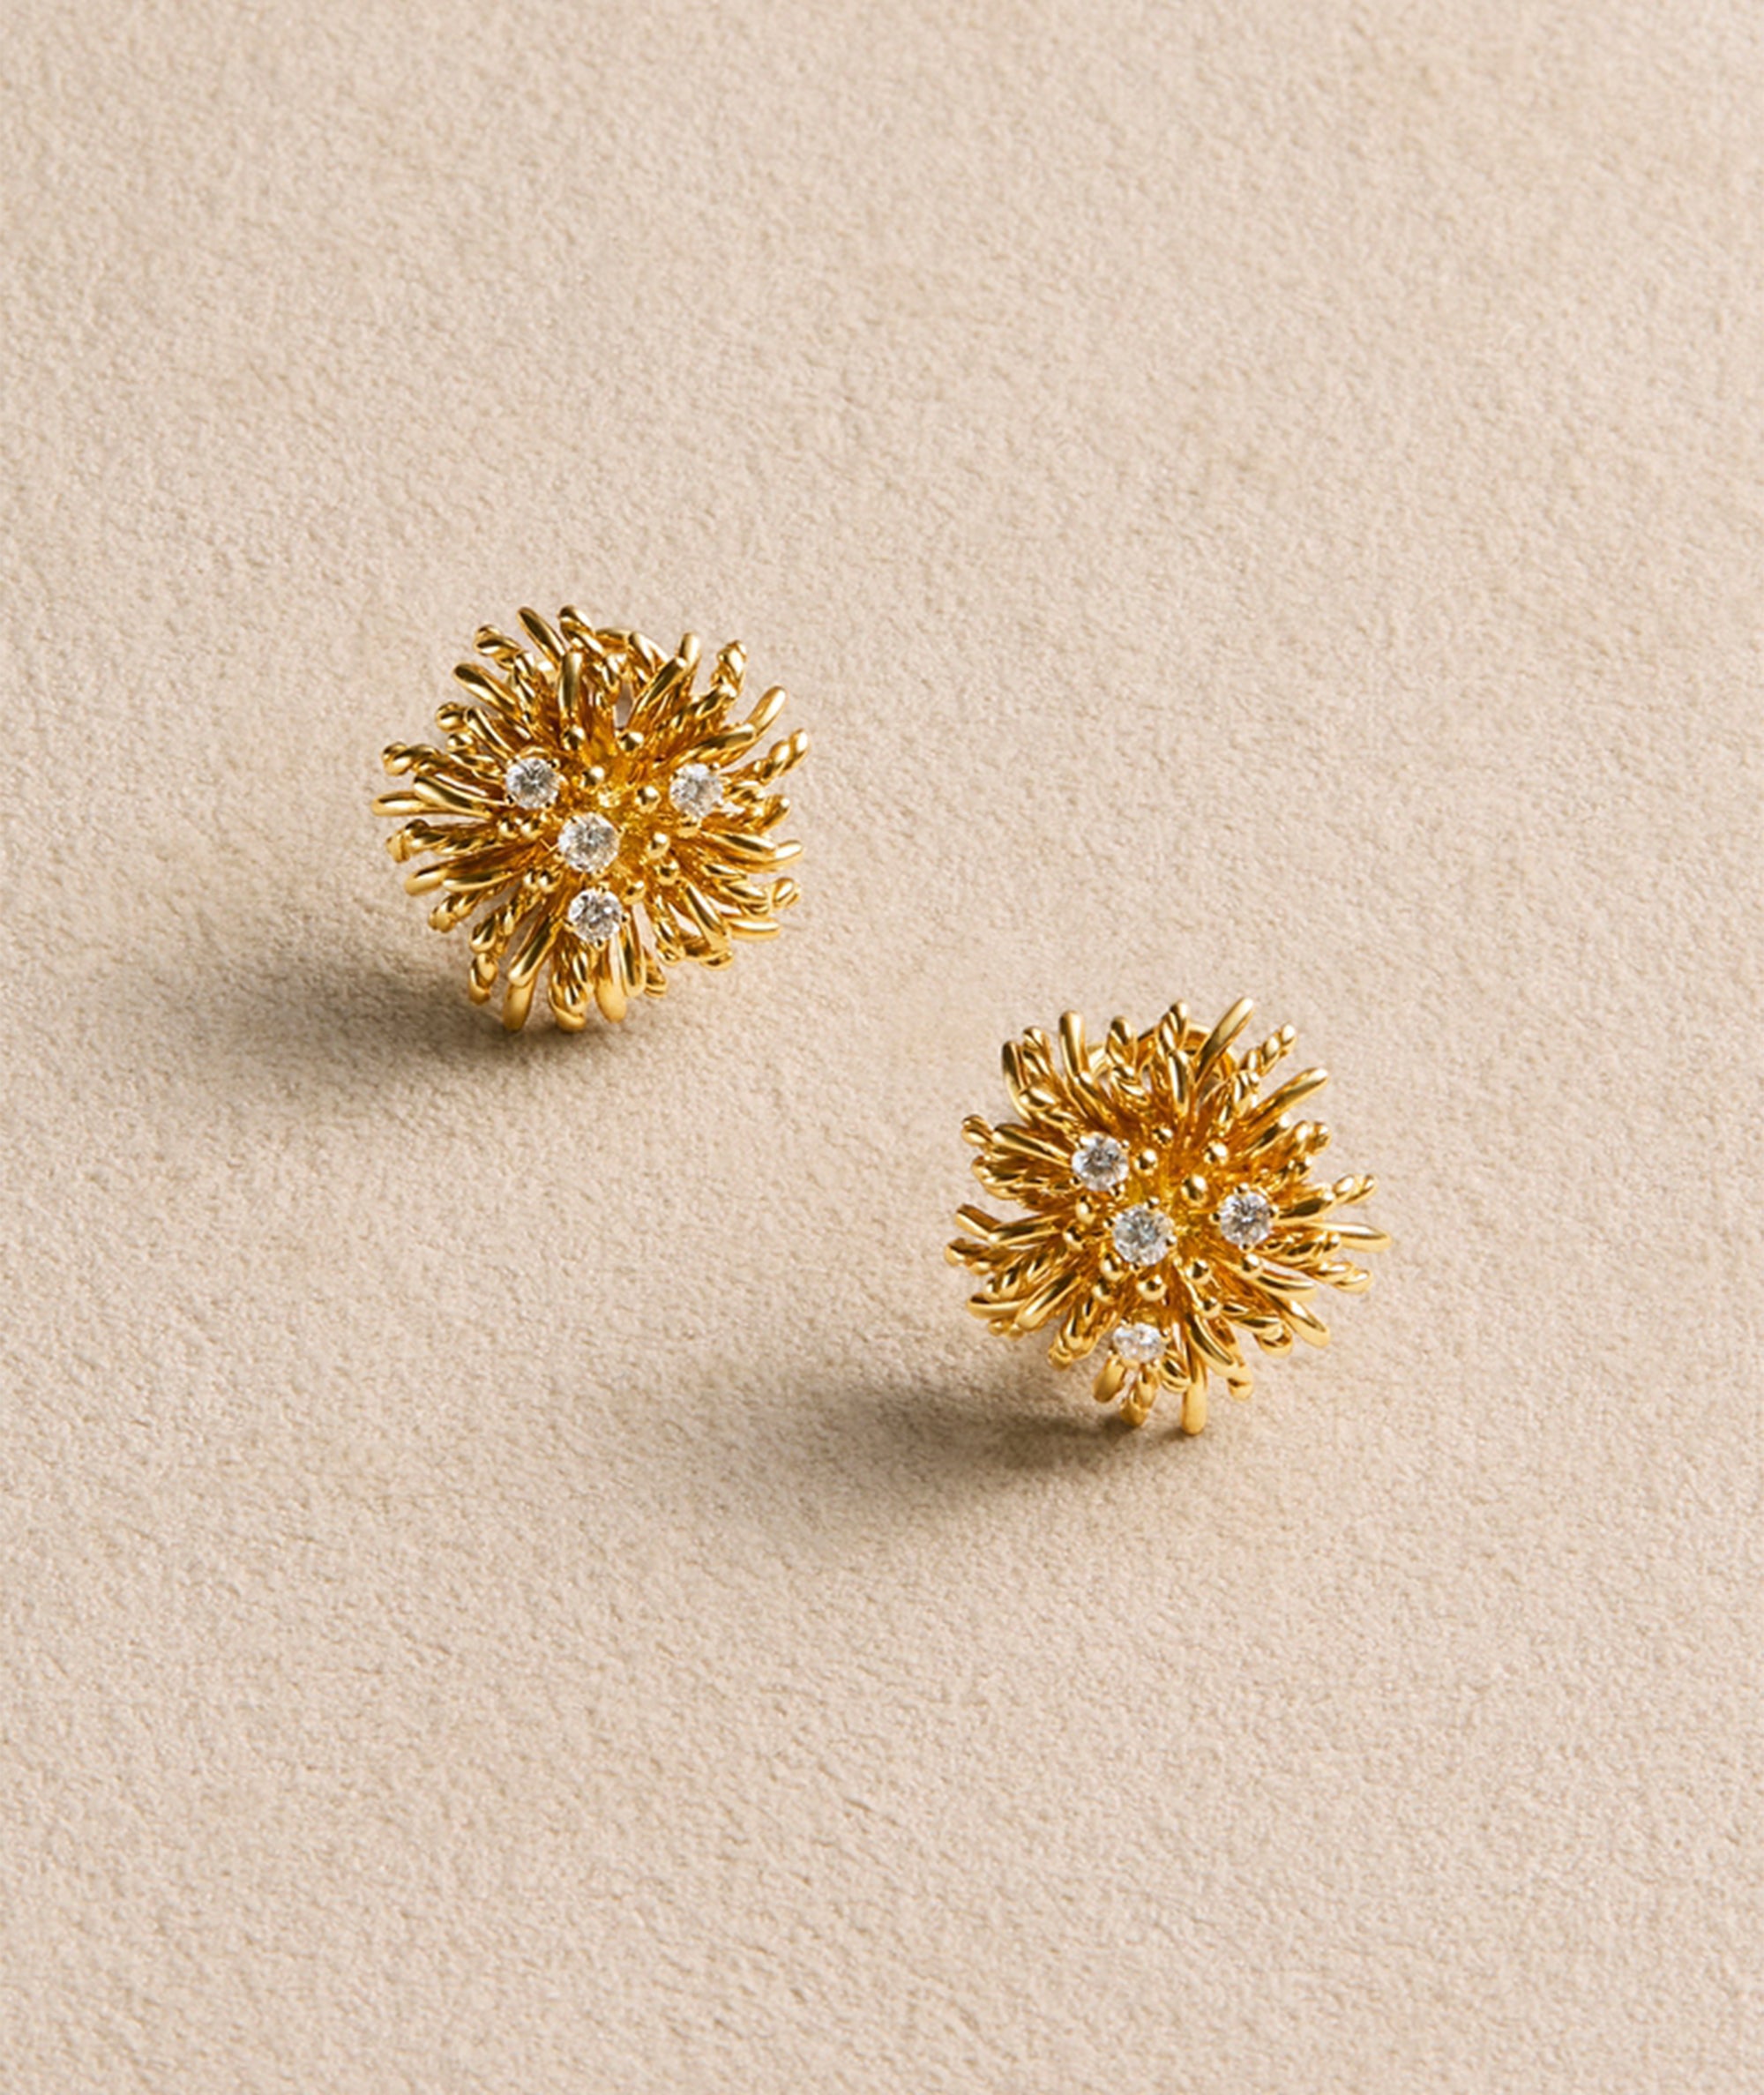 Vintage earrings from Tiffany & Co. in yellow gold with diamonds. Exclusively sourced for EREDE Curated.